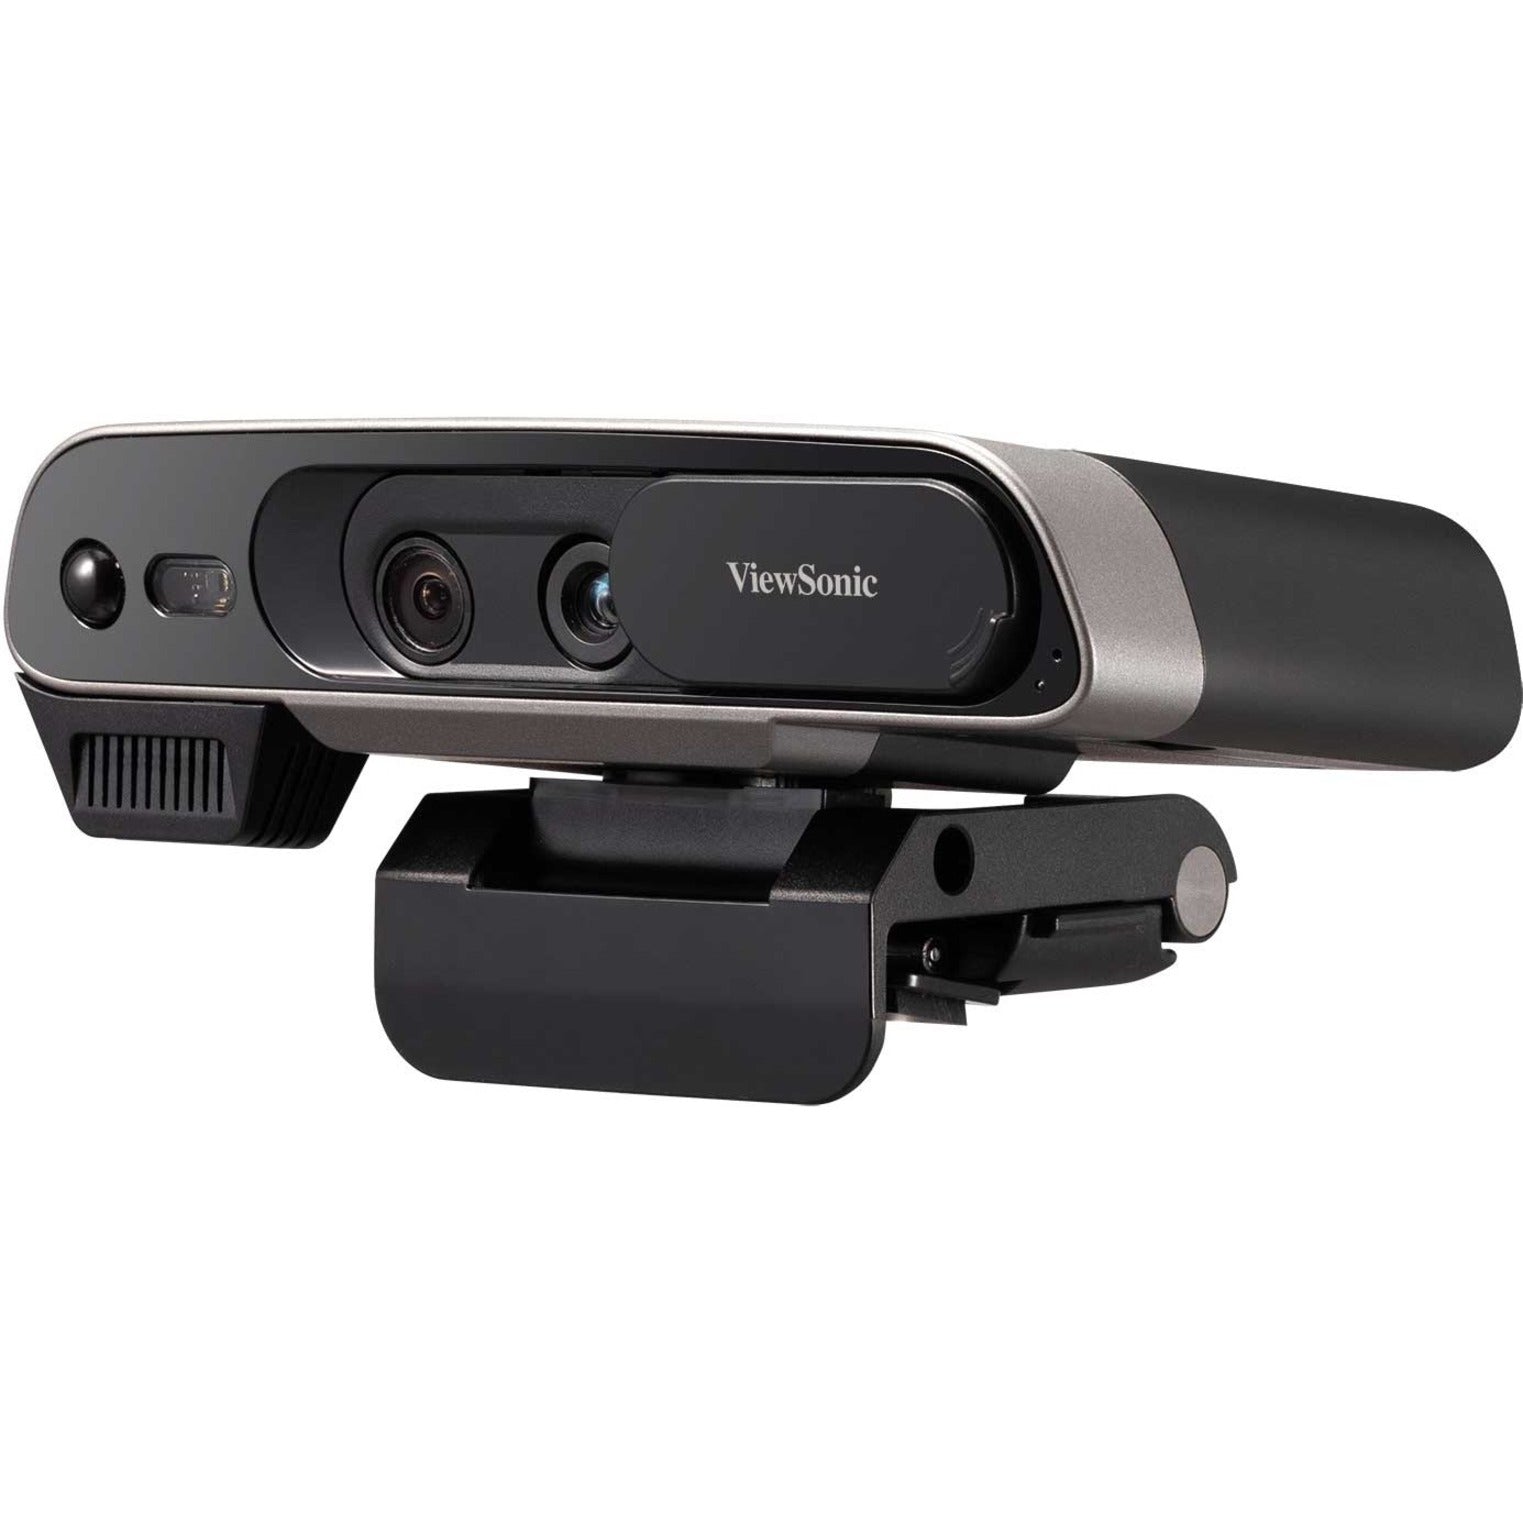 ViewSonic VBC100 4K Data Collection Camera, USB 3.0 Type C, HDMI Out, Built-in Microphone